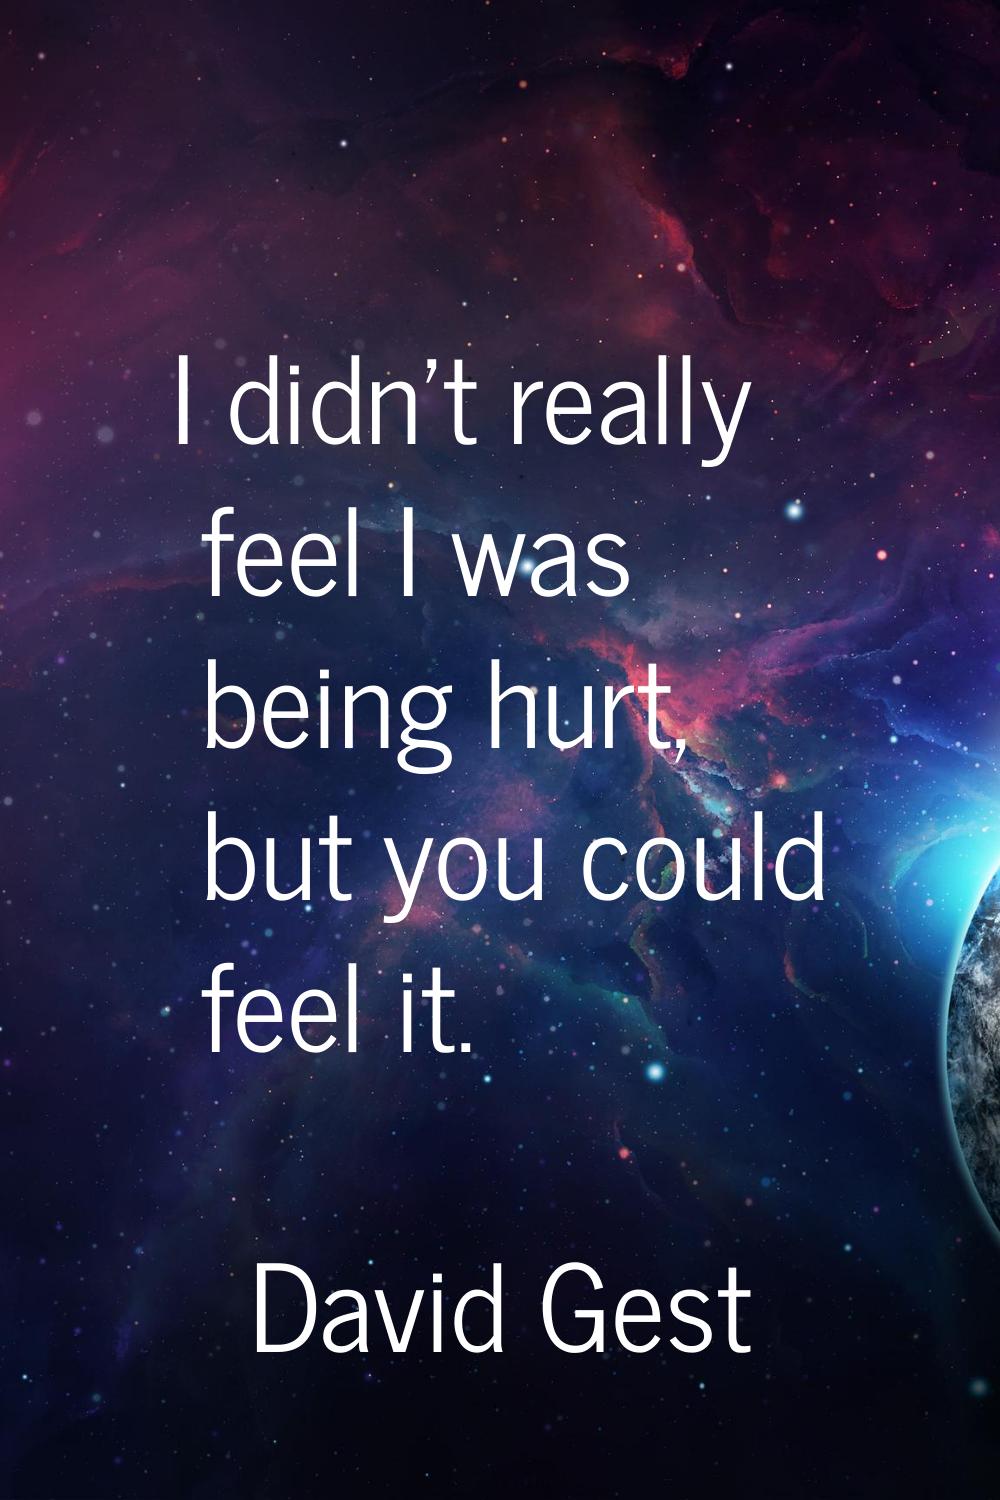 I didn't really feel I was being hurt, but you could feel it.